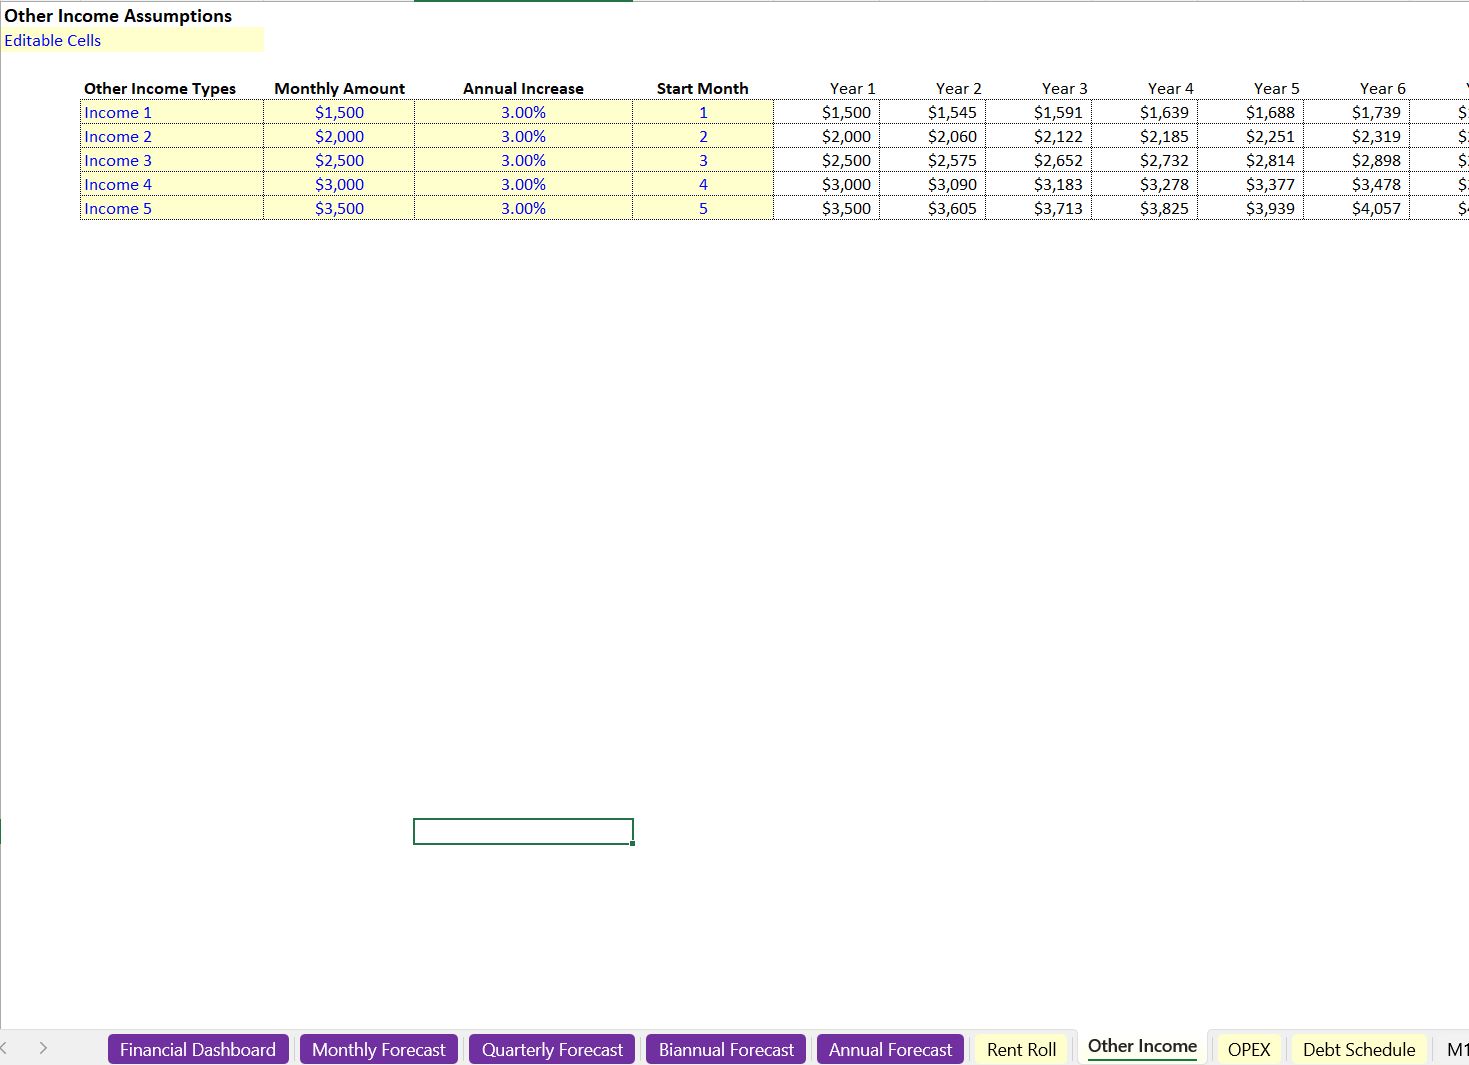 1000 Unit Rent Roll Template (Excel workbook (XLSX)) Preview Image